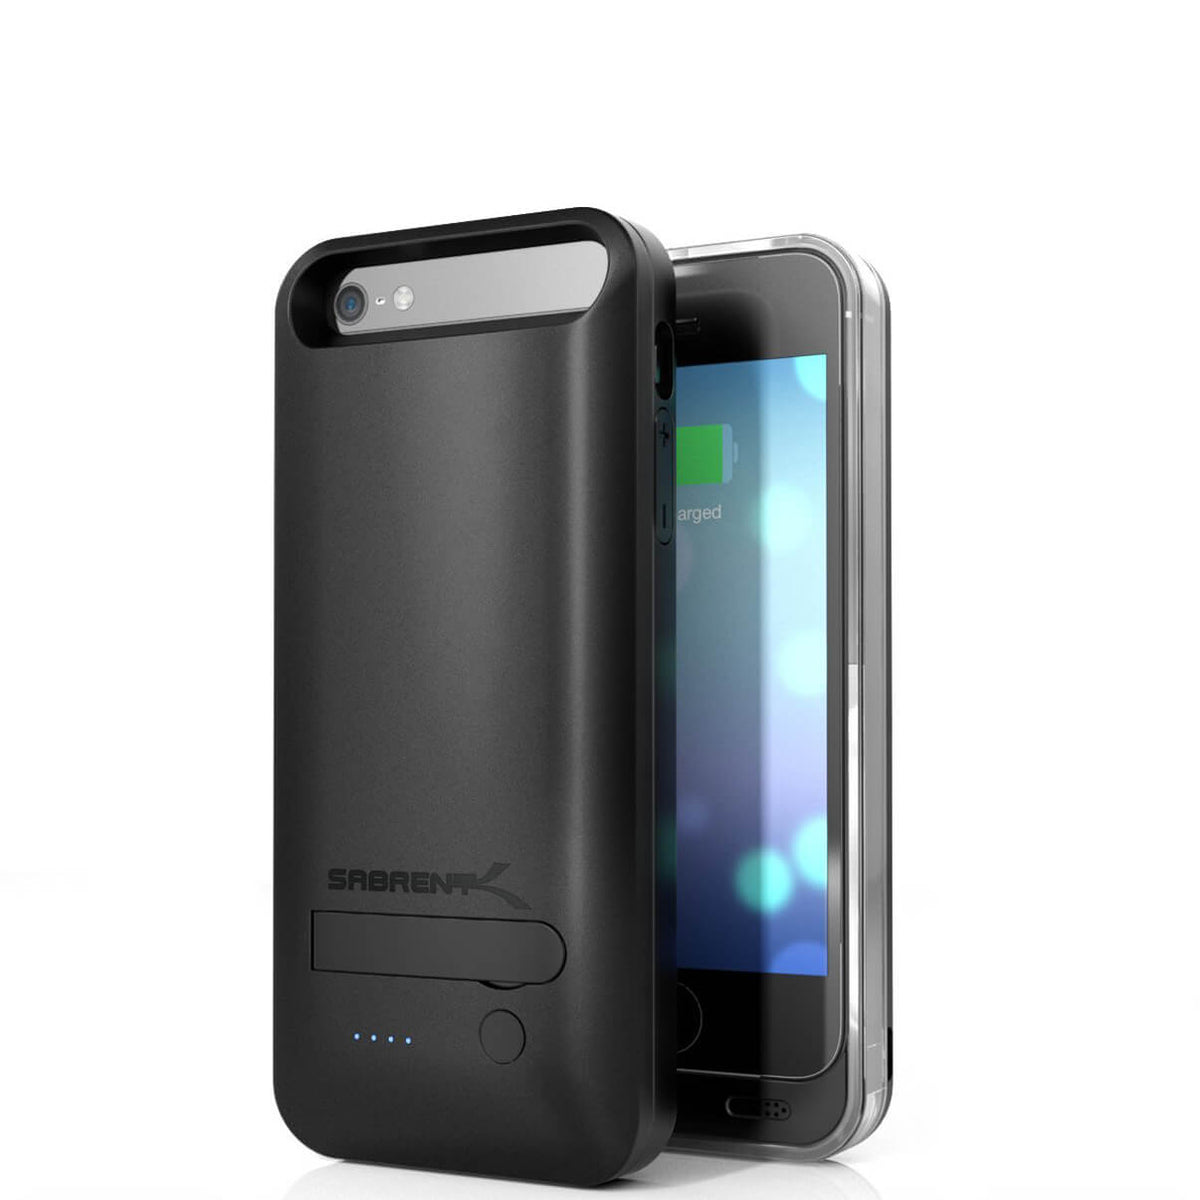 Rechargeable Extended Battery Case For iPhone 5/5s/SE